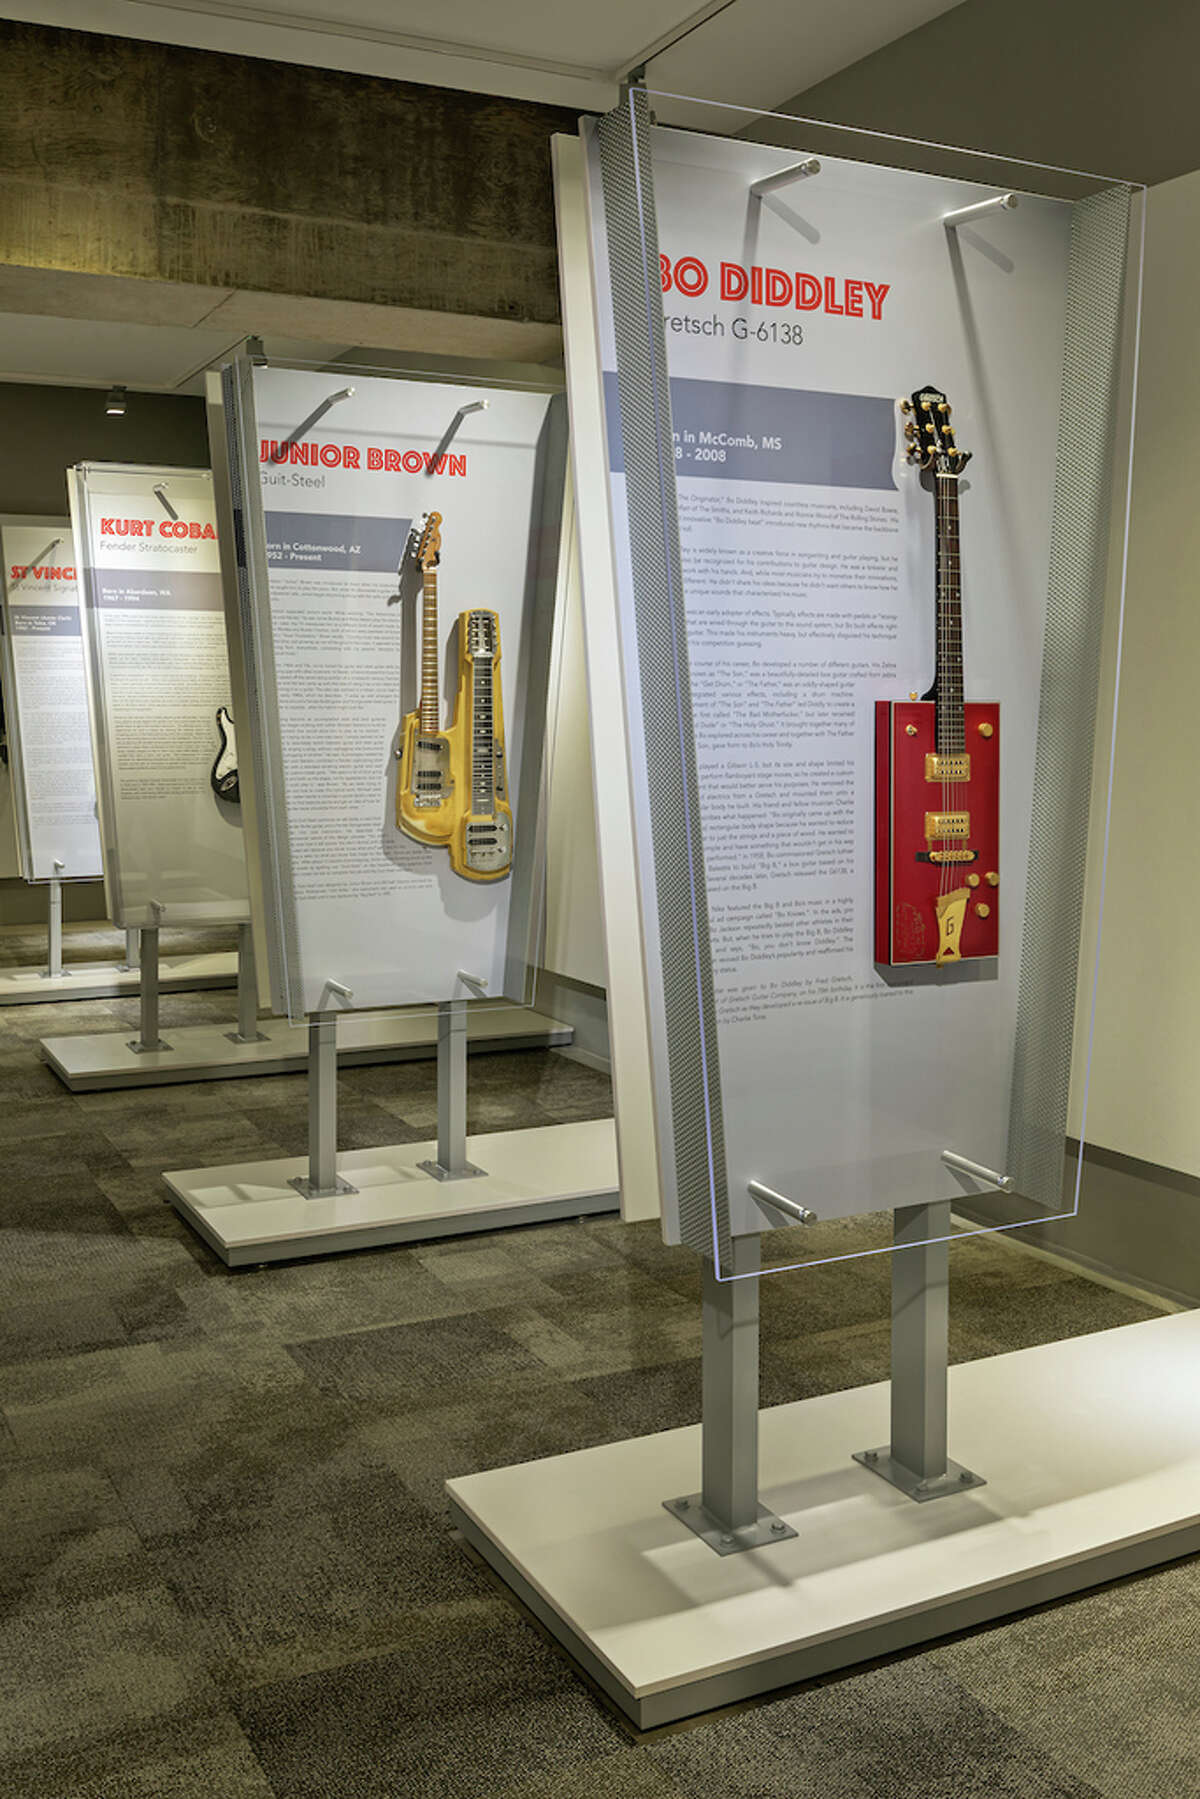 One of Junior Brown's guit-steels, known as 'Old Yeller,' is part of Wire & Wood: Designing Iconic Guitars, curated and produced by W. Todd Vaught and Lisa S. Johnson, at the Museum of Design Atlanta.